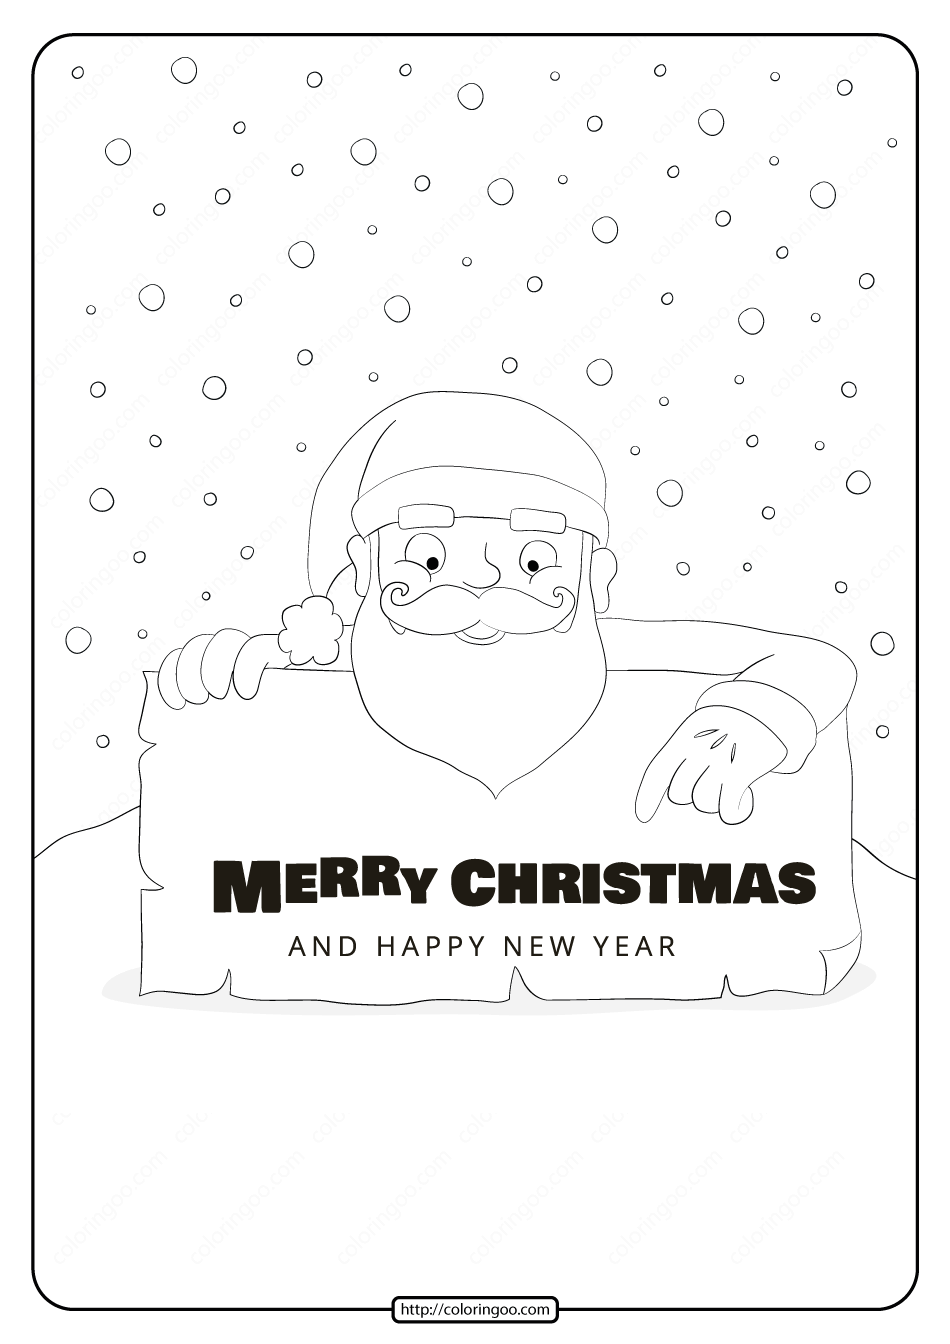 merry christmas and happy new year coloring pages